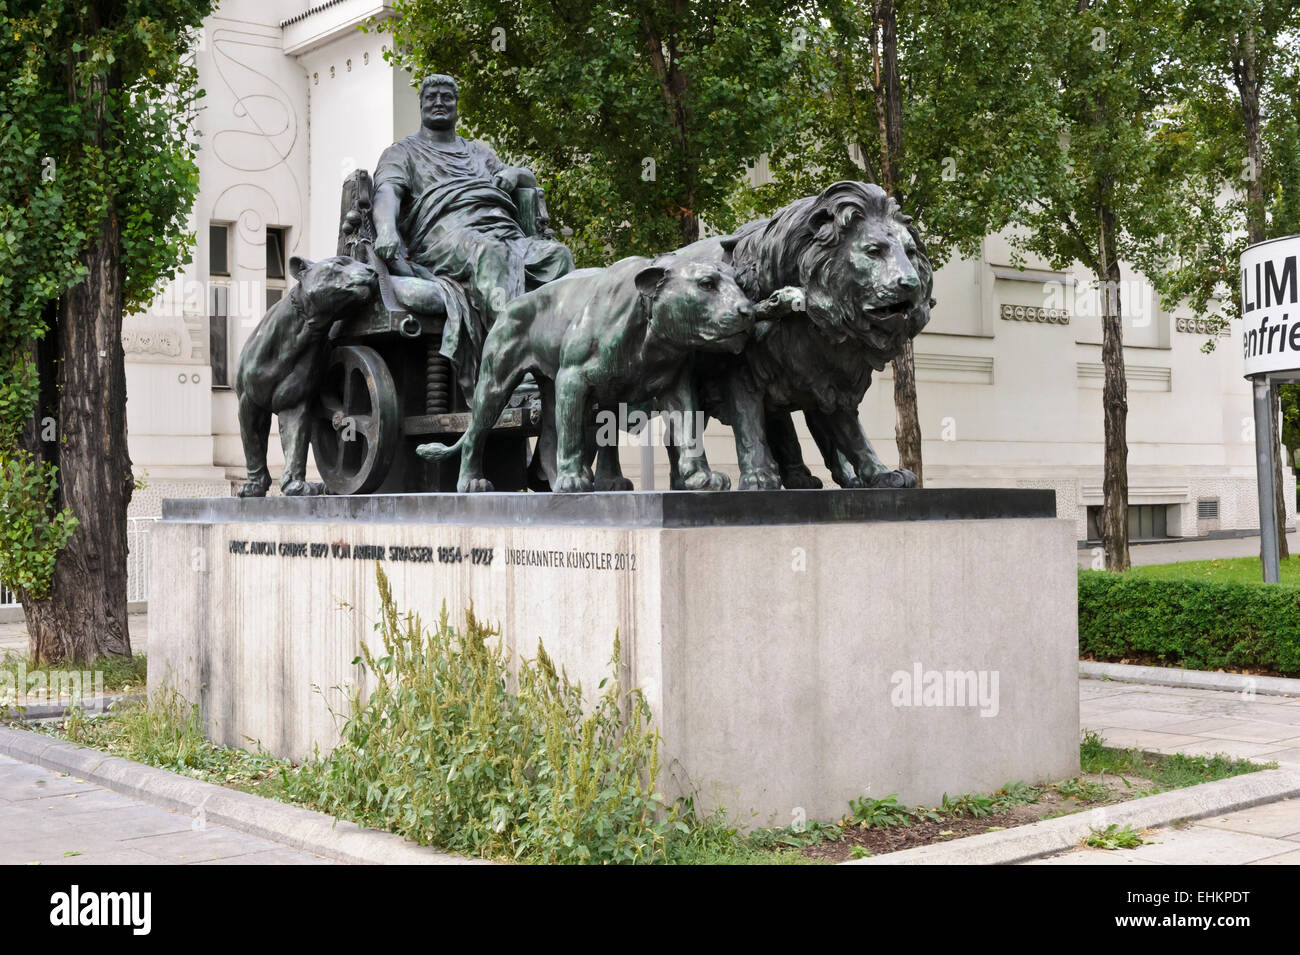 A huge bronze sculpture of Mark Anthony in a lion drawn chariot outside the Secession building, Vienna, Austria. Stock Photo